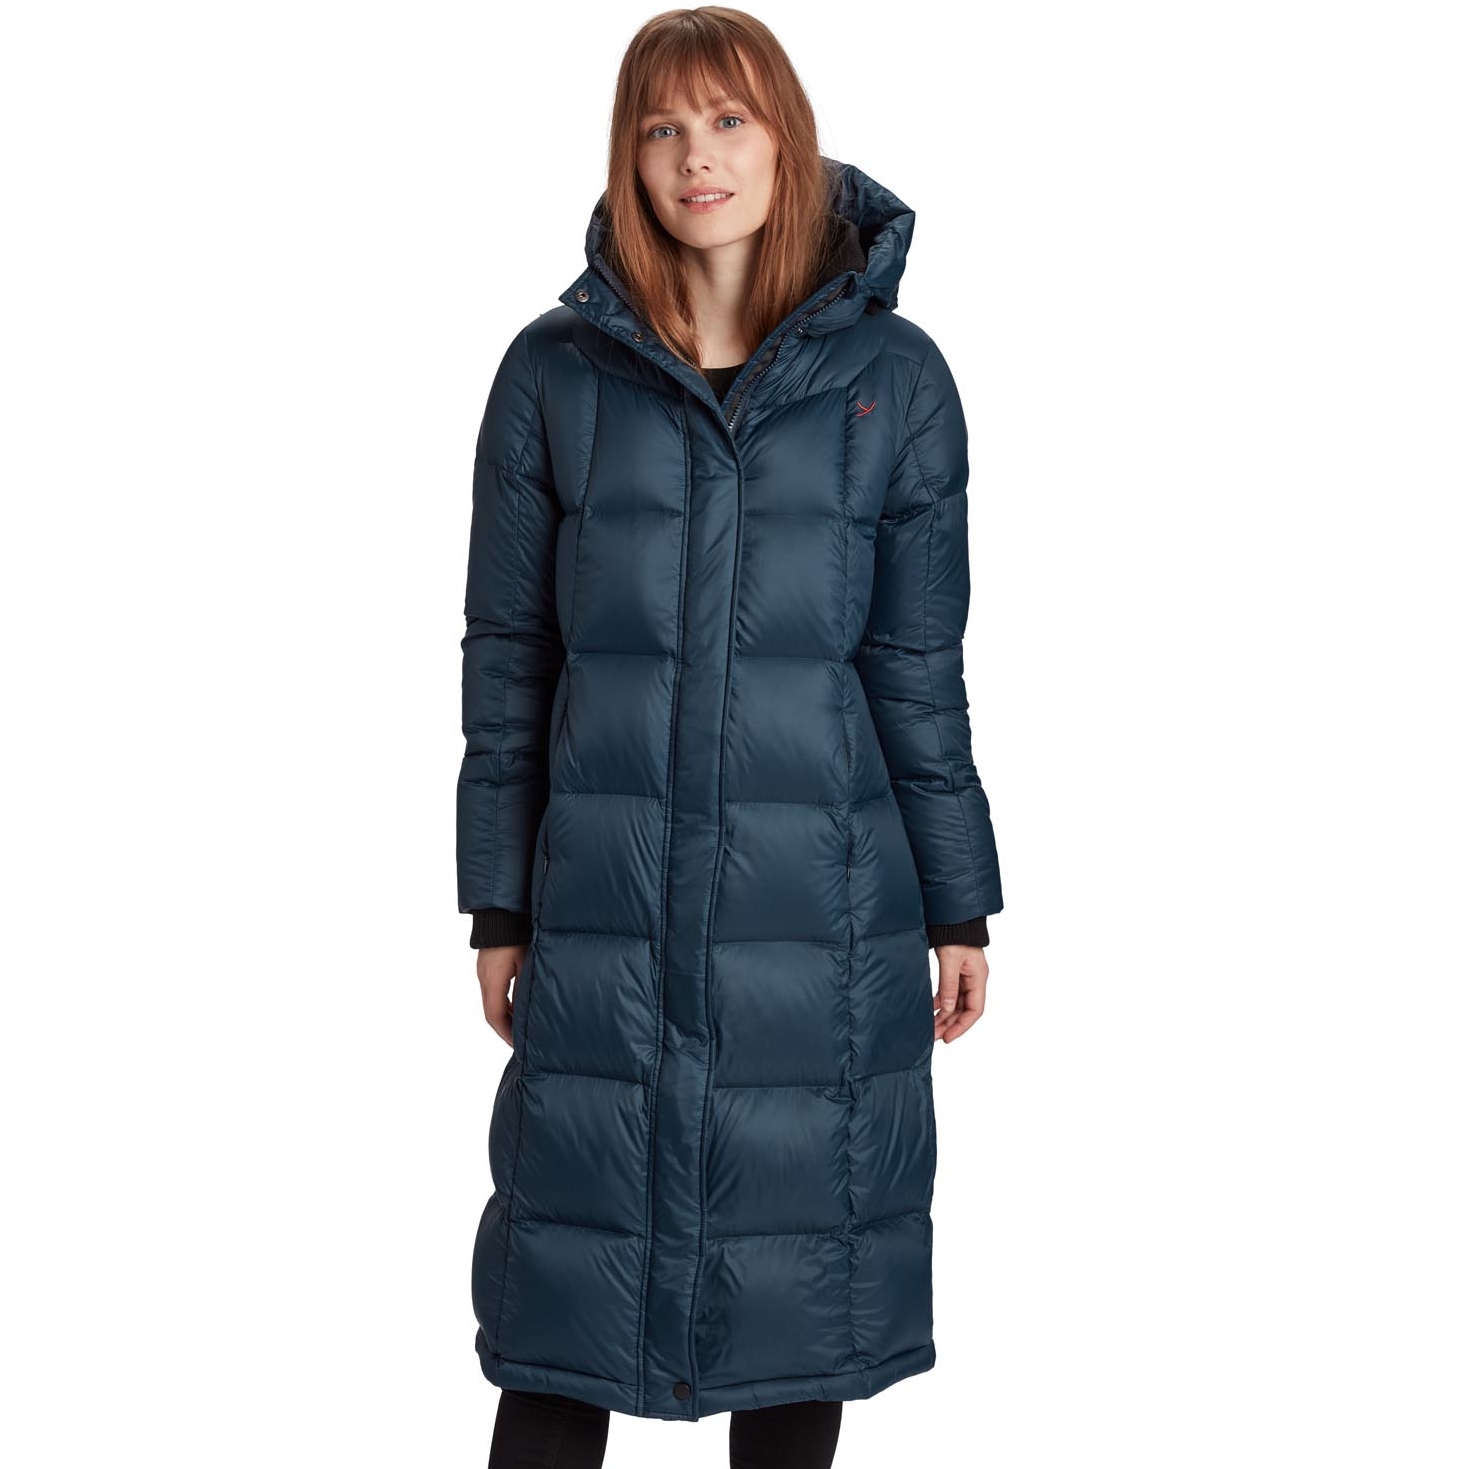 Picture of Y by Nordisk Saga Down Coat Women - dress blue